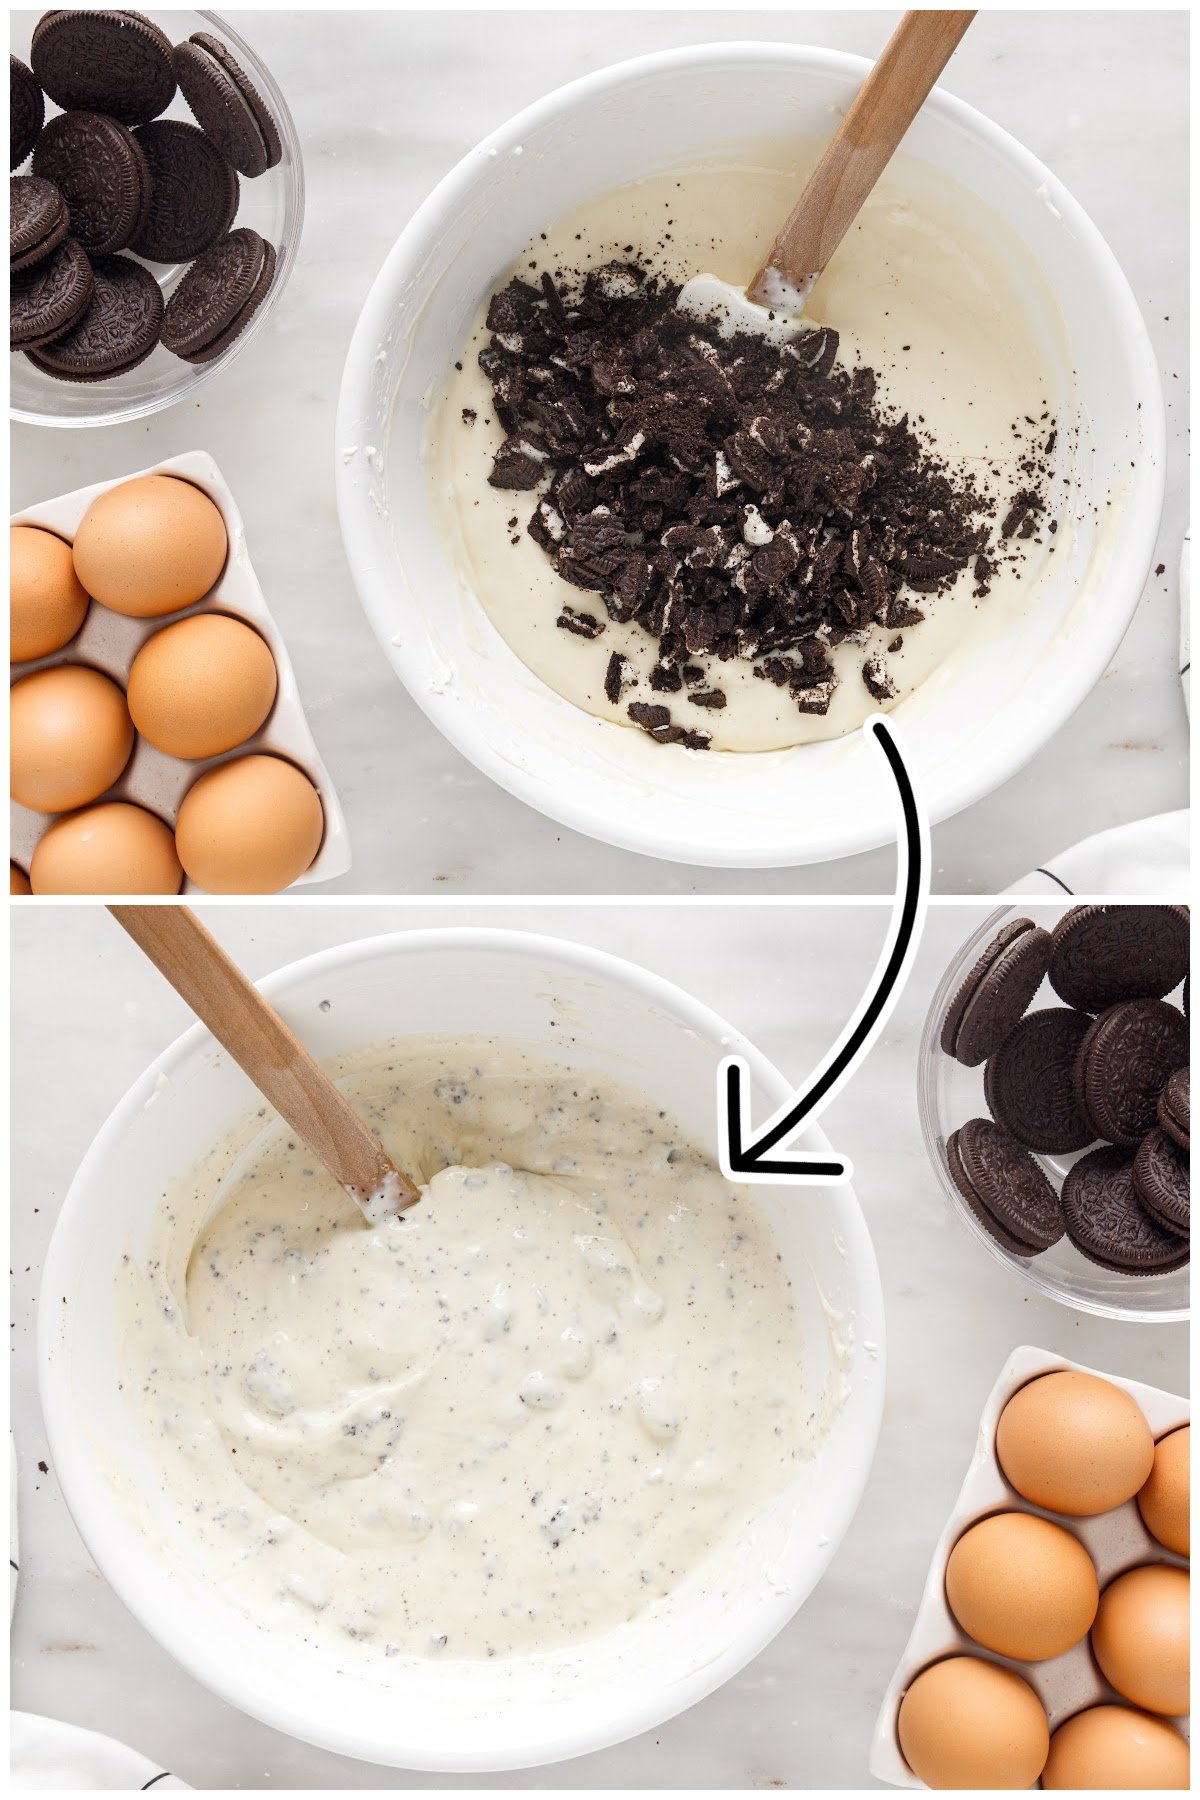 Folding in chopped Oreo cookies into the cheesecake batter.